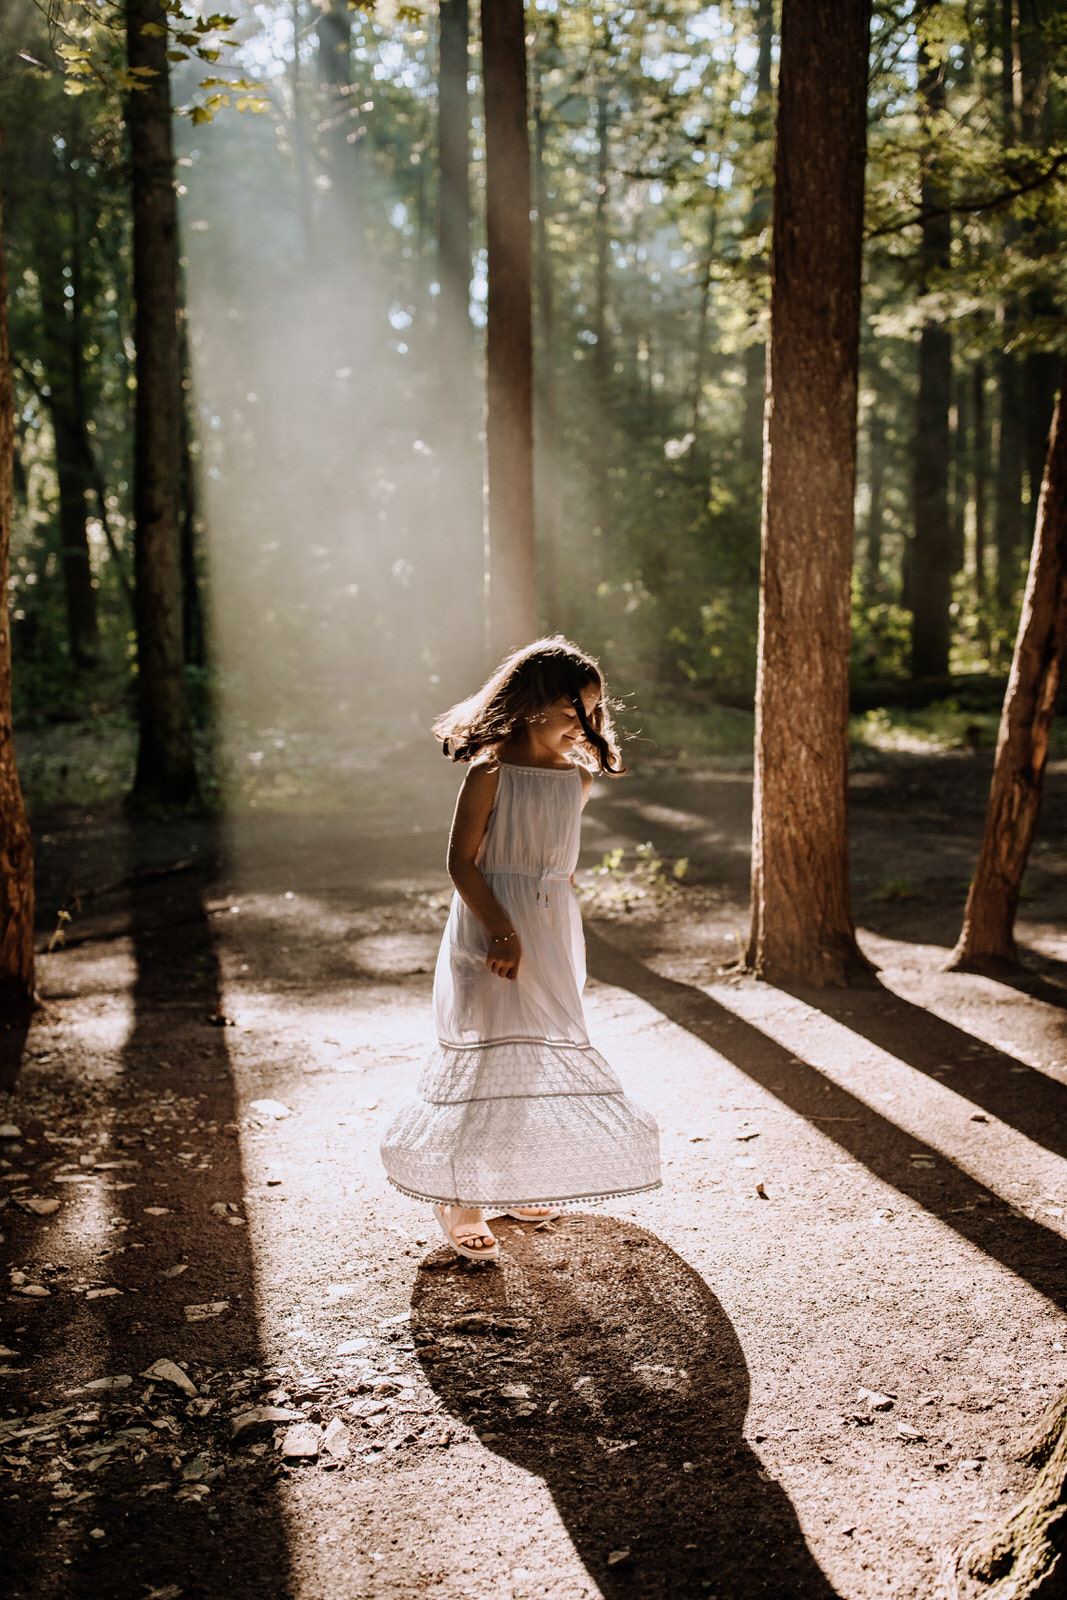 Young girl dancing in a dress in a beam of sunlight in the woods